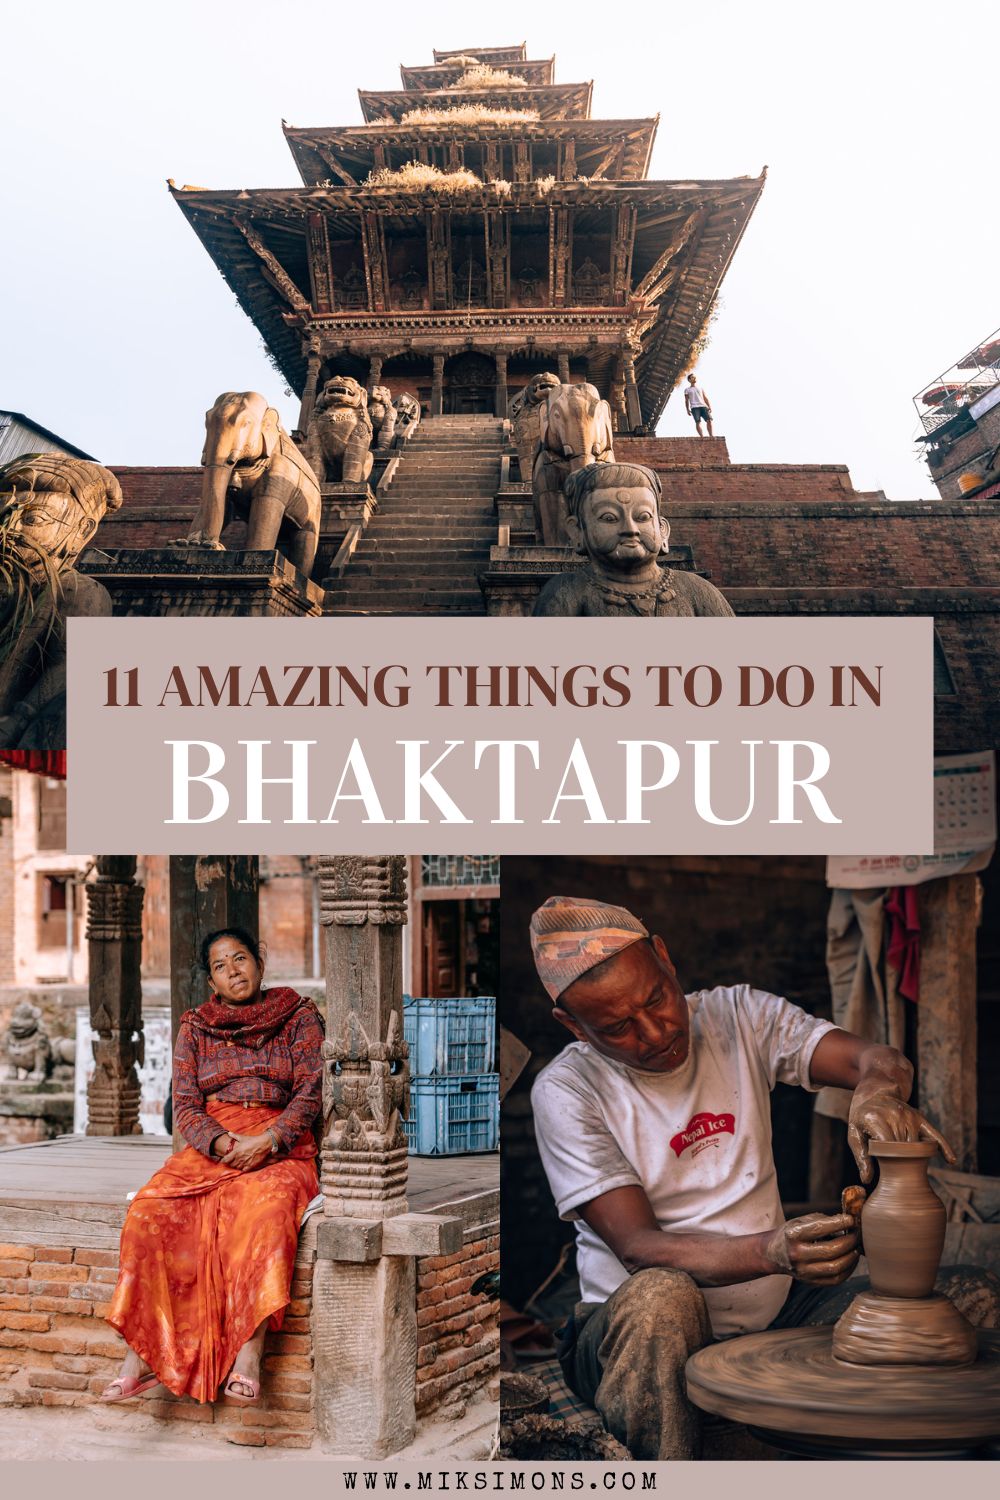 11 Awesome places to visit in Bhaktapur in Nepal1